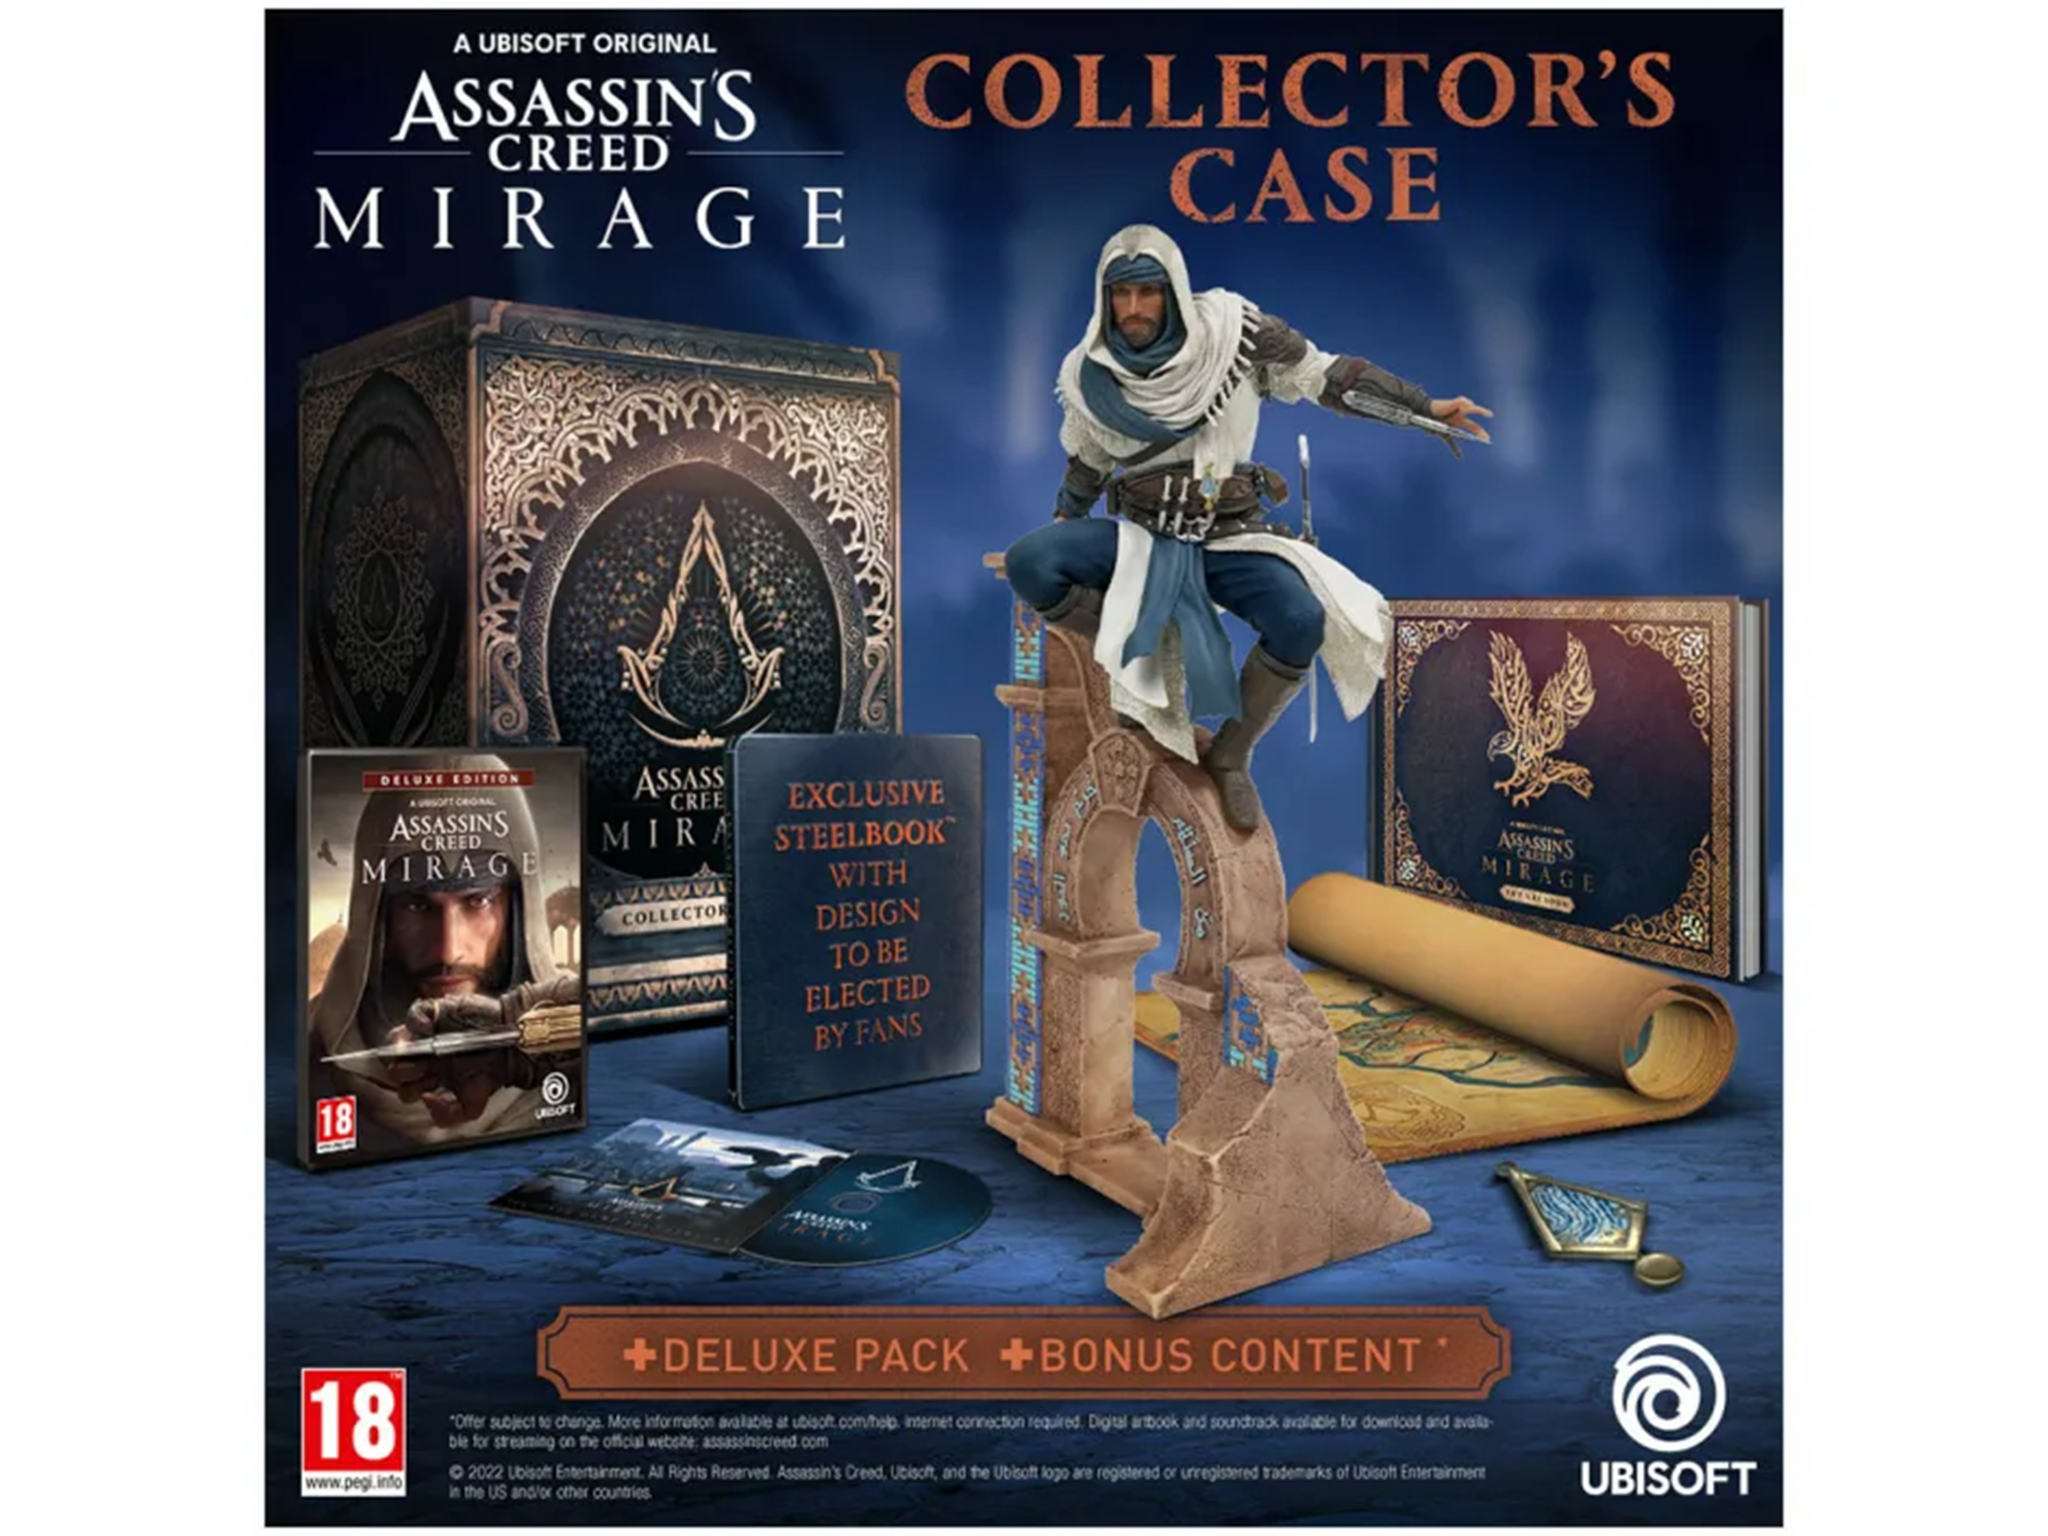 Assassin's Creed Mirage Deluxe Edition Announced 